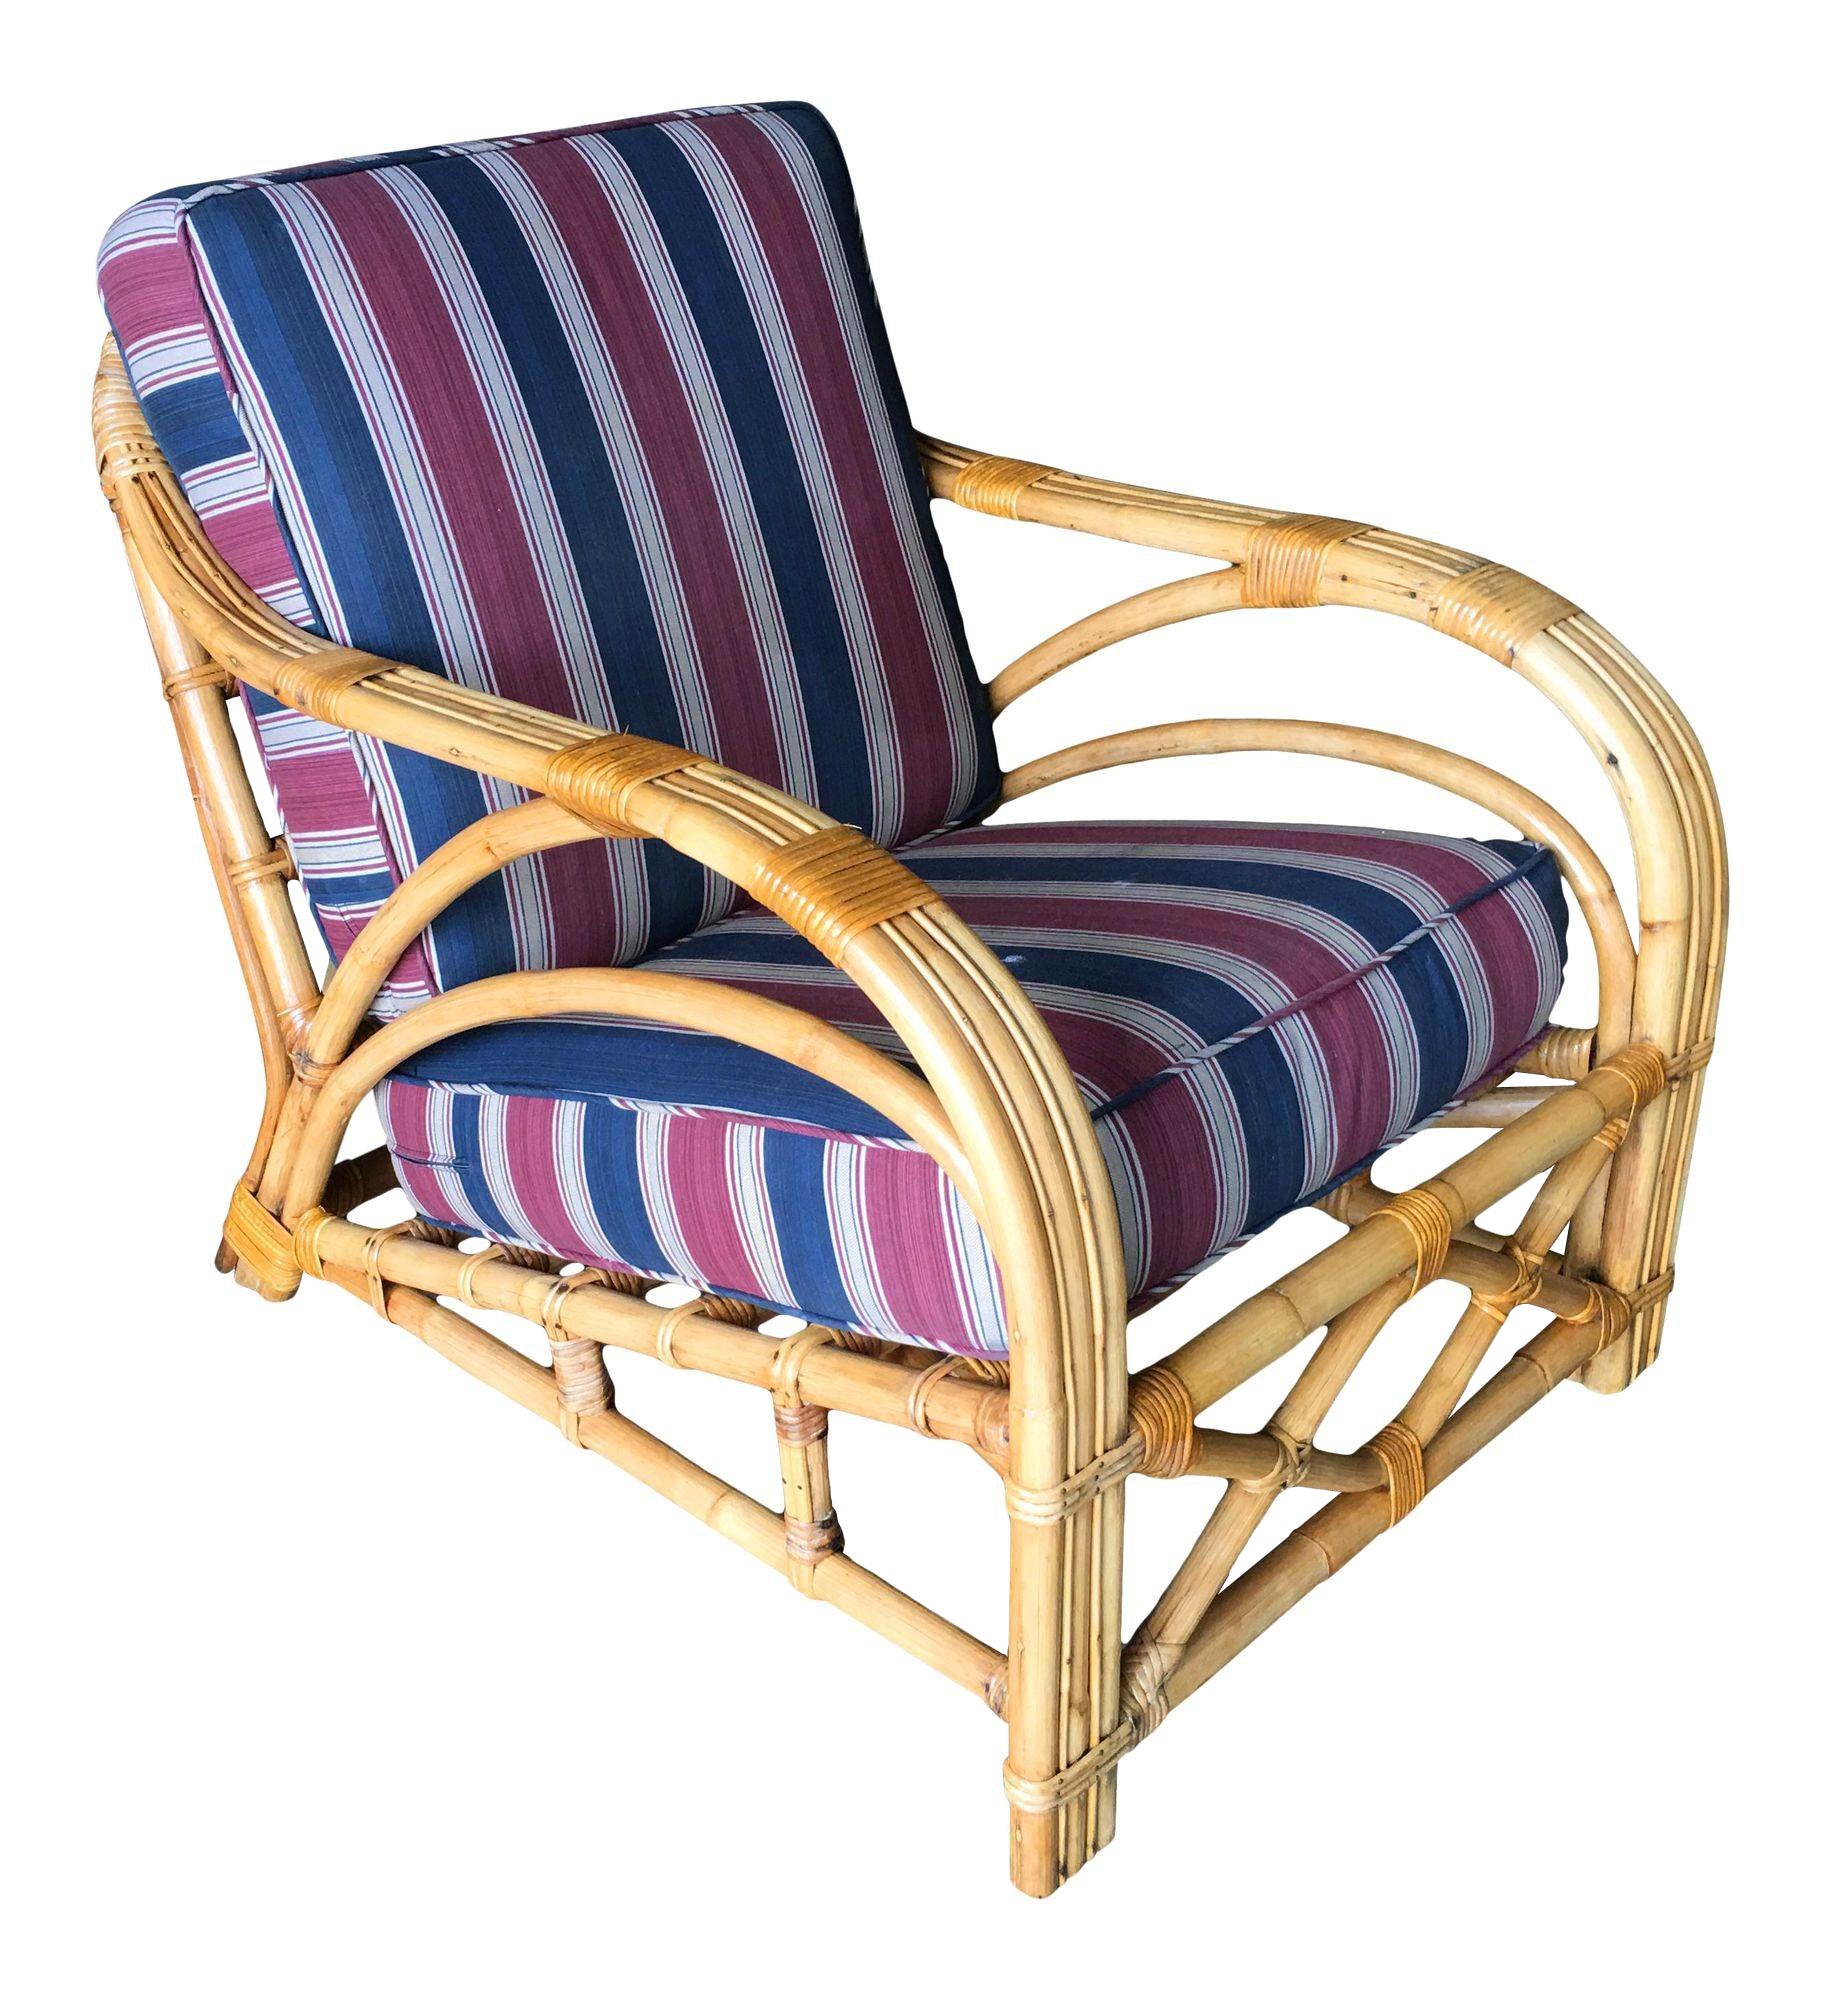 Restored Three-Strand "1940s Transition" Rattan Lounge For Sale